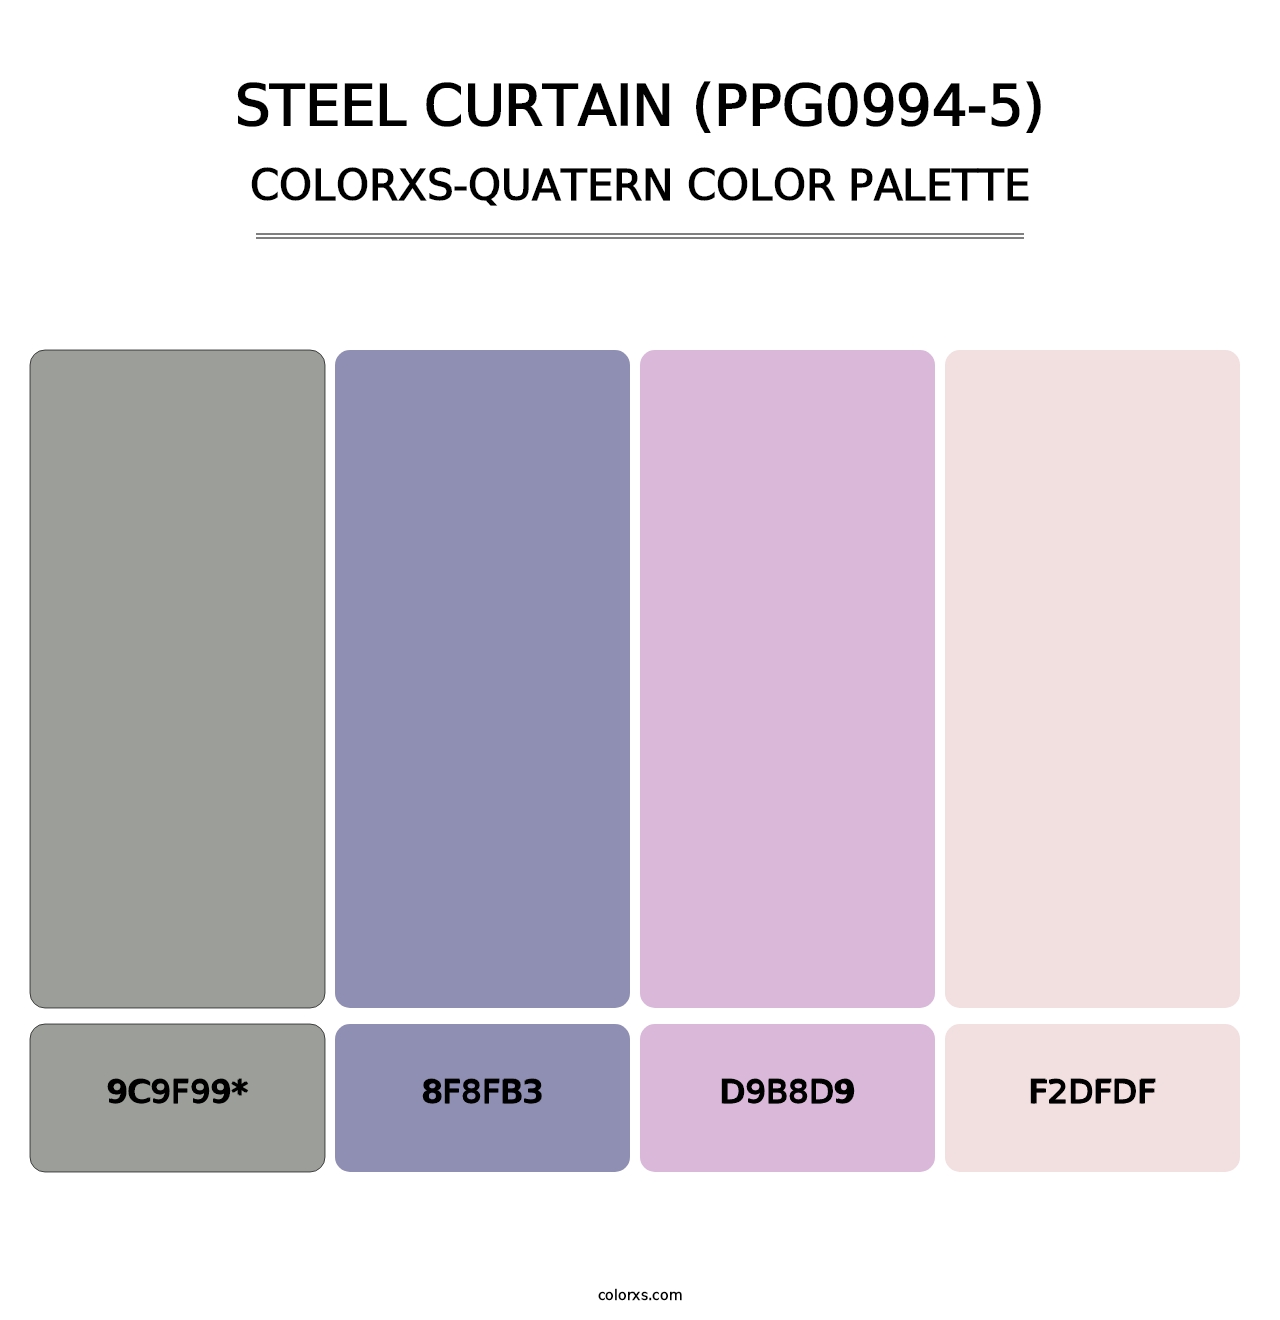 Steel Curtain (PPG0994-5) - Colorxs Quatern Palette